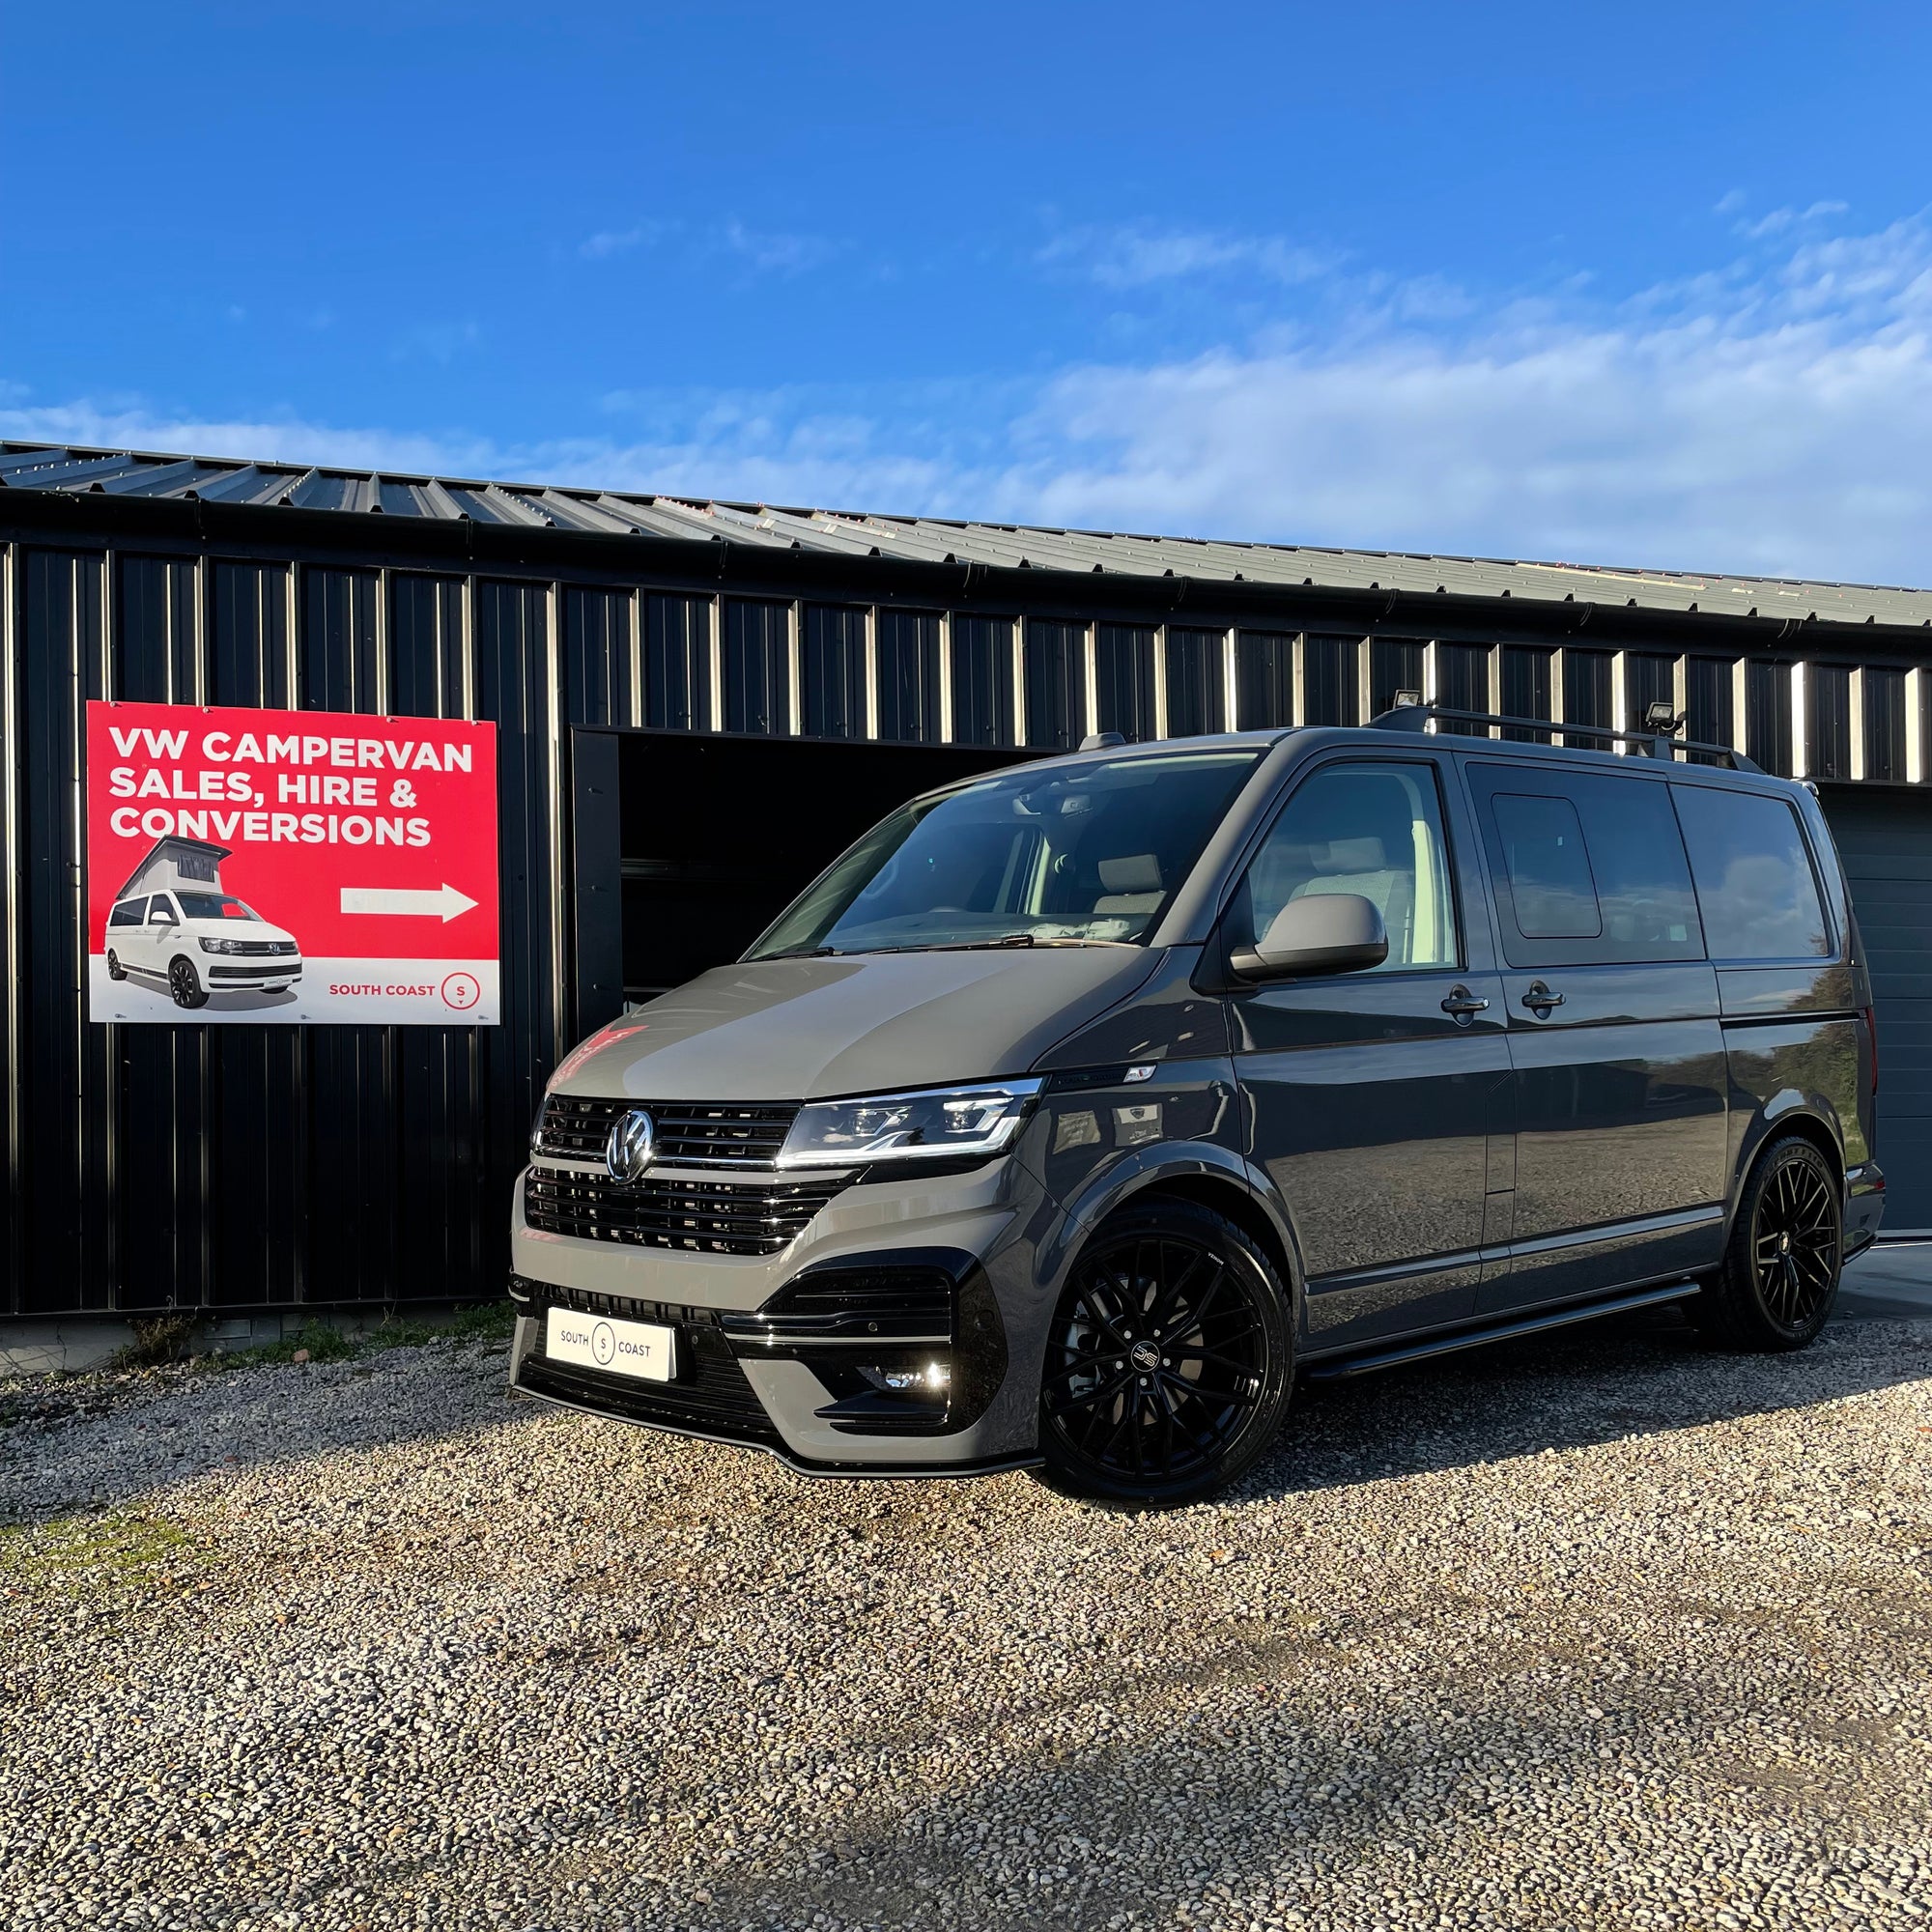 BRAND NEW Pure Grey Highline T6.1 Kombi with LV-R kit